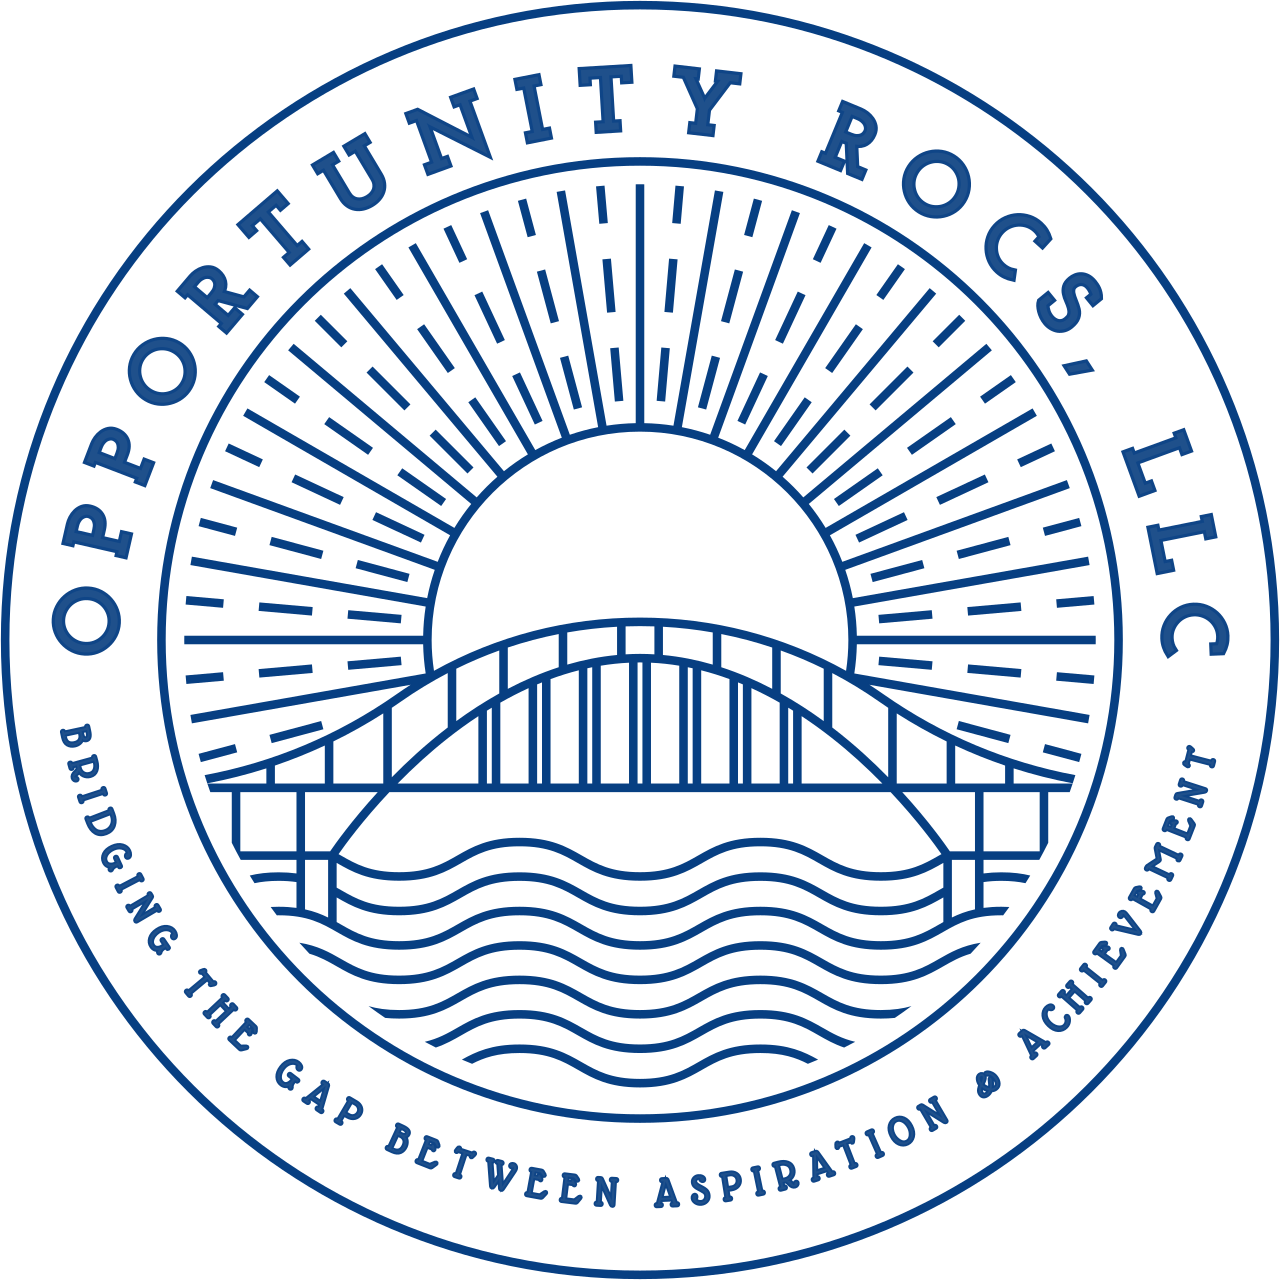 OPPORTUNITY ROCS, LLC's web page